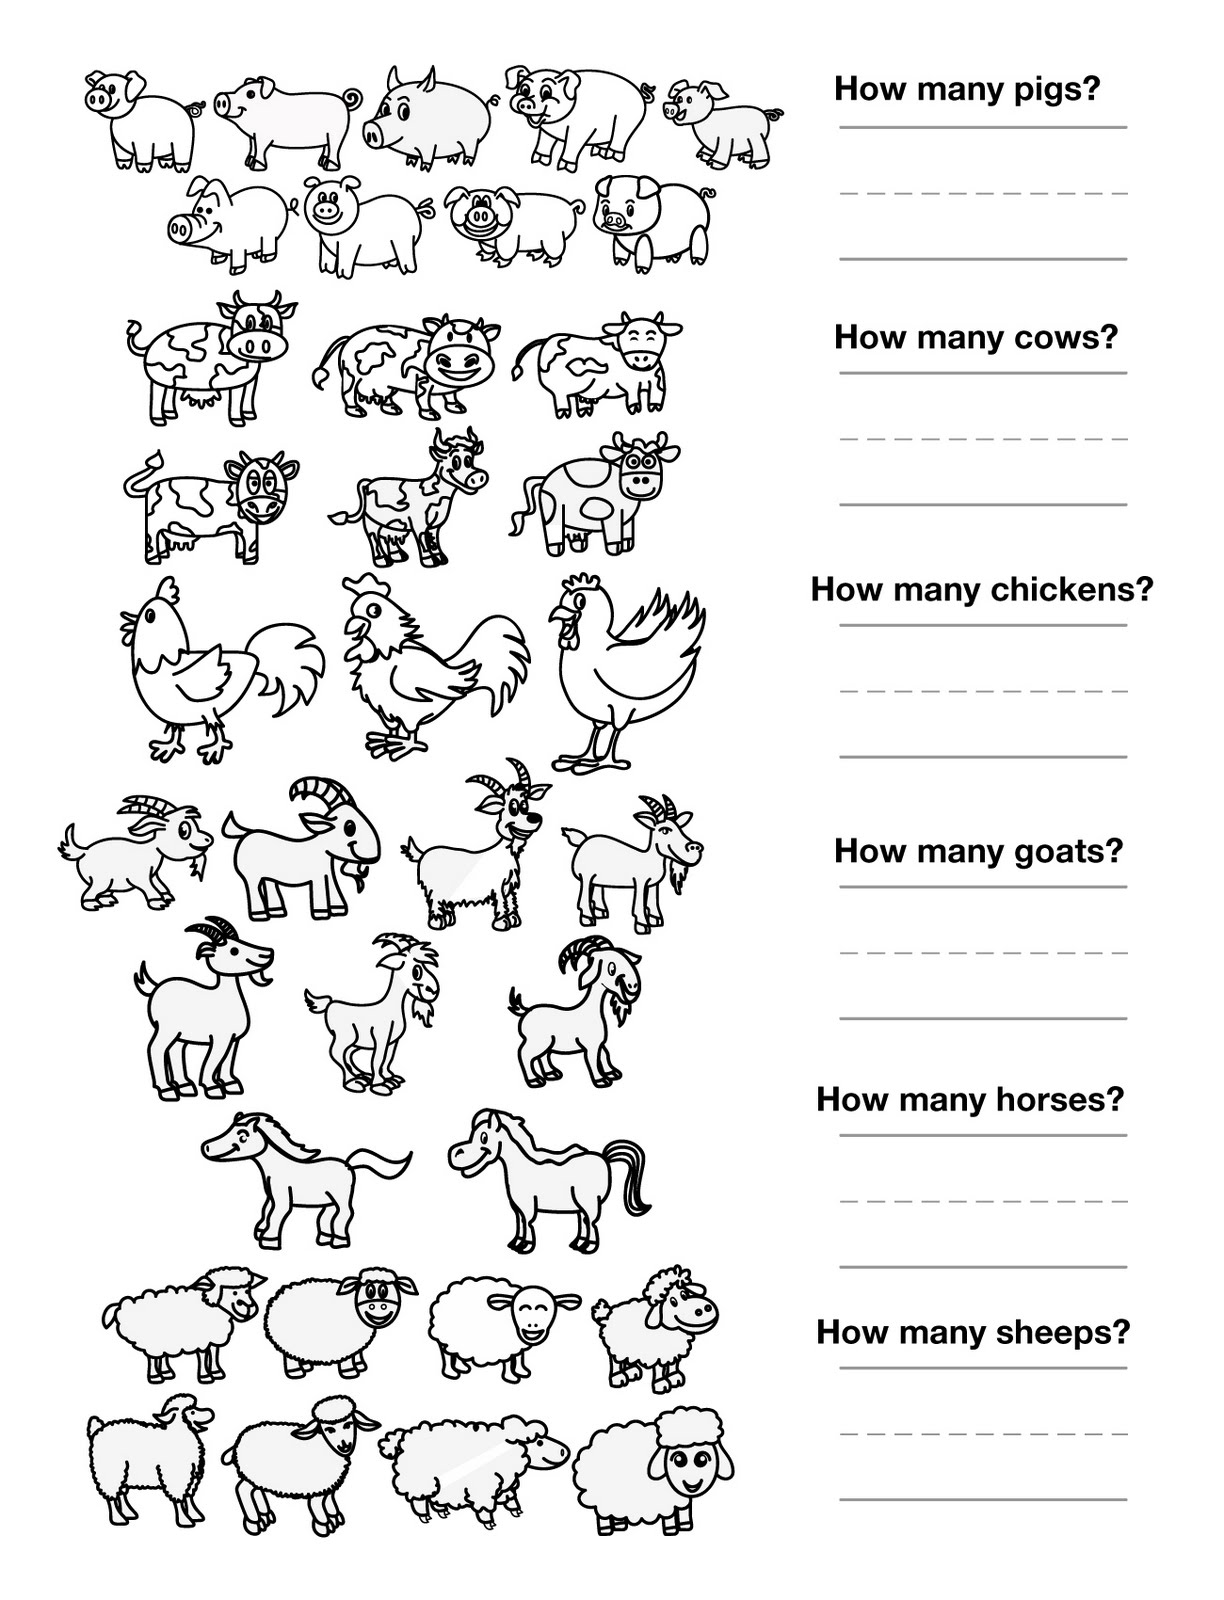 Animal Counting Worksheets for Preschoolers